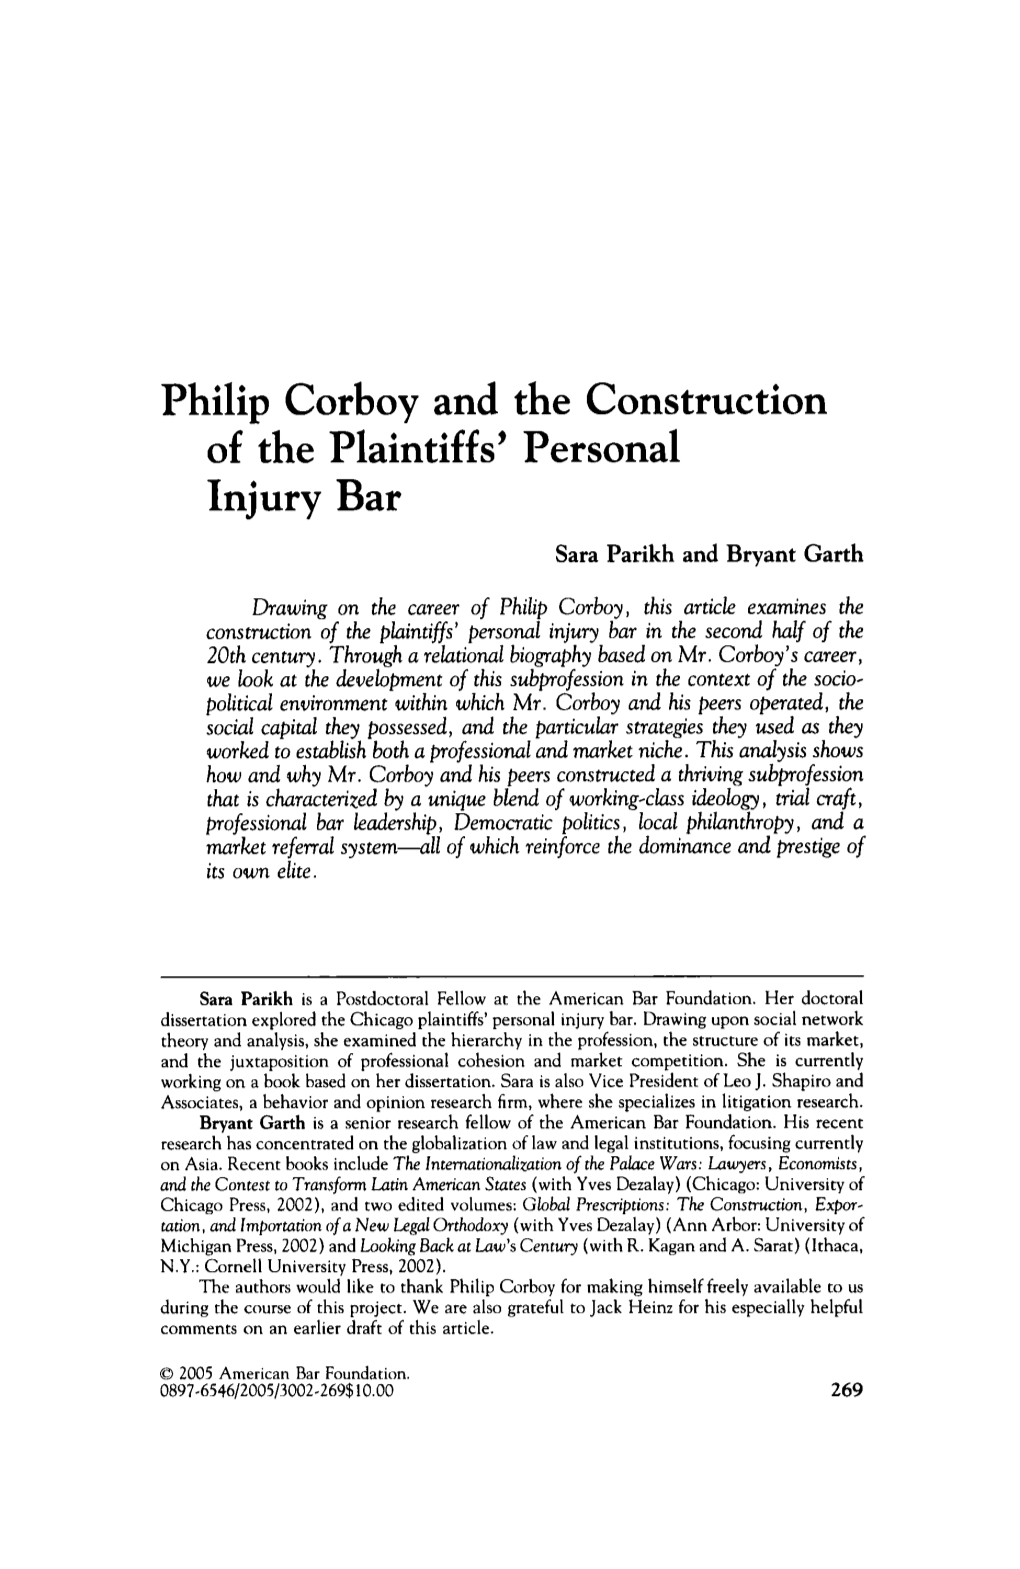 Philip Corboy and the Construction of the Plaintiffs' Personal Injury